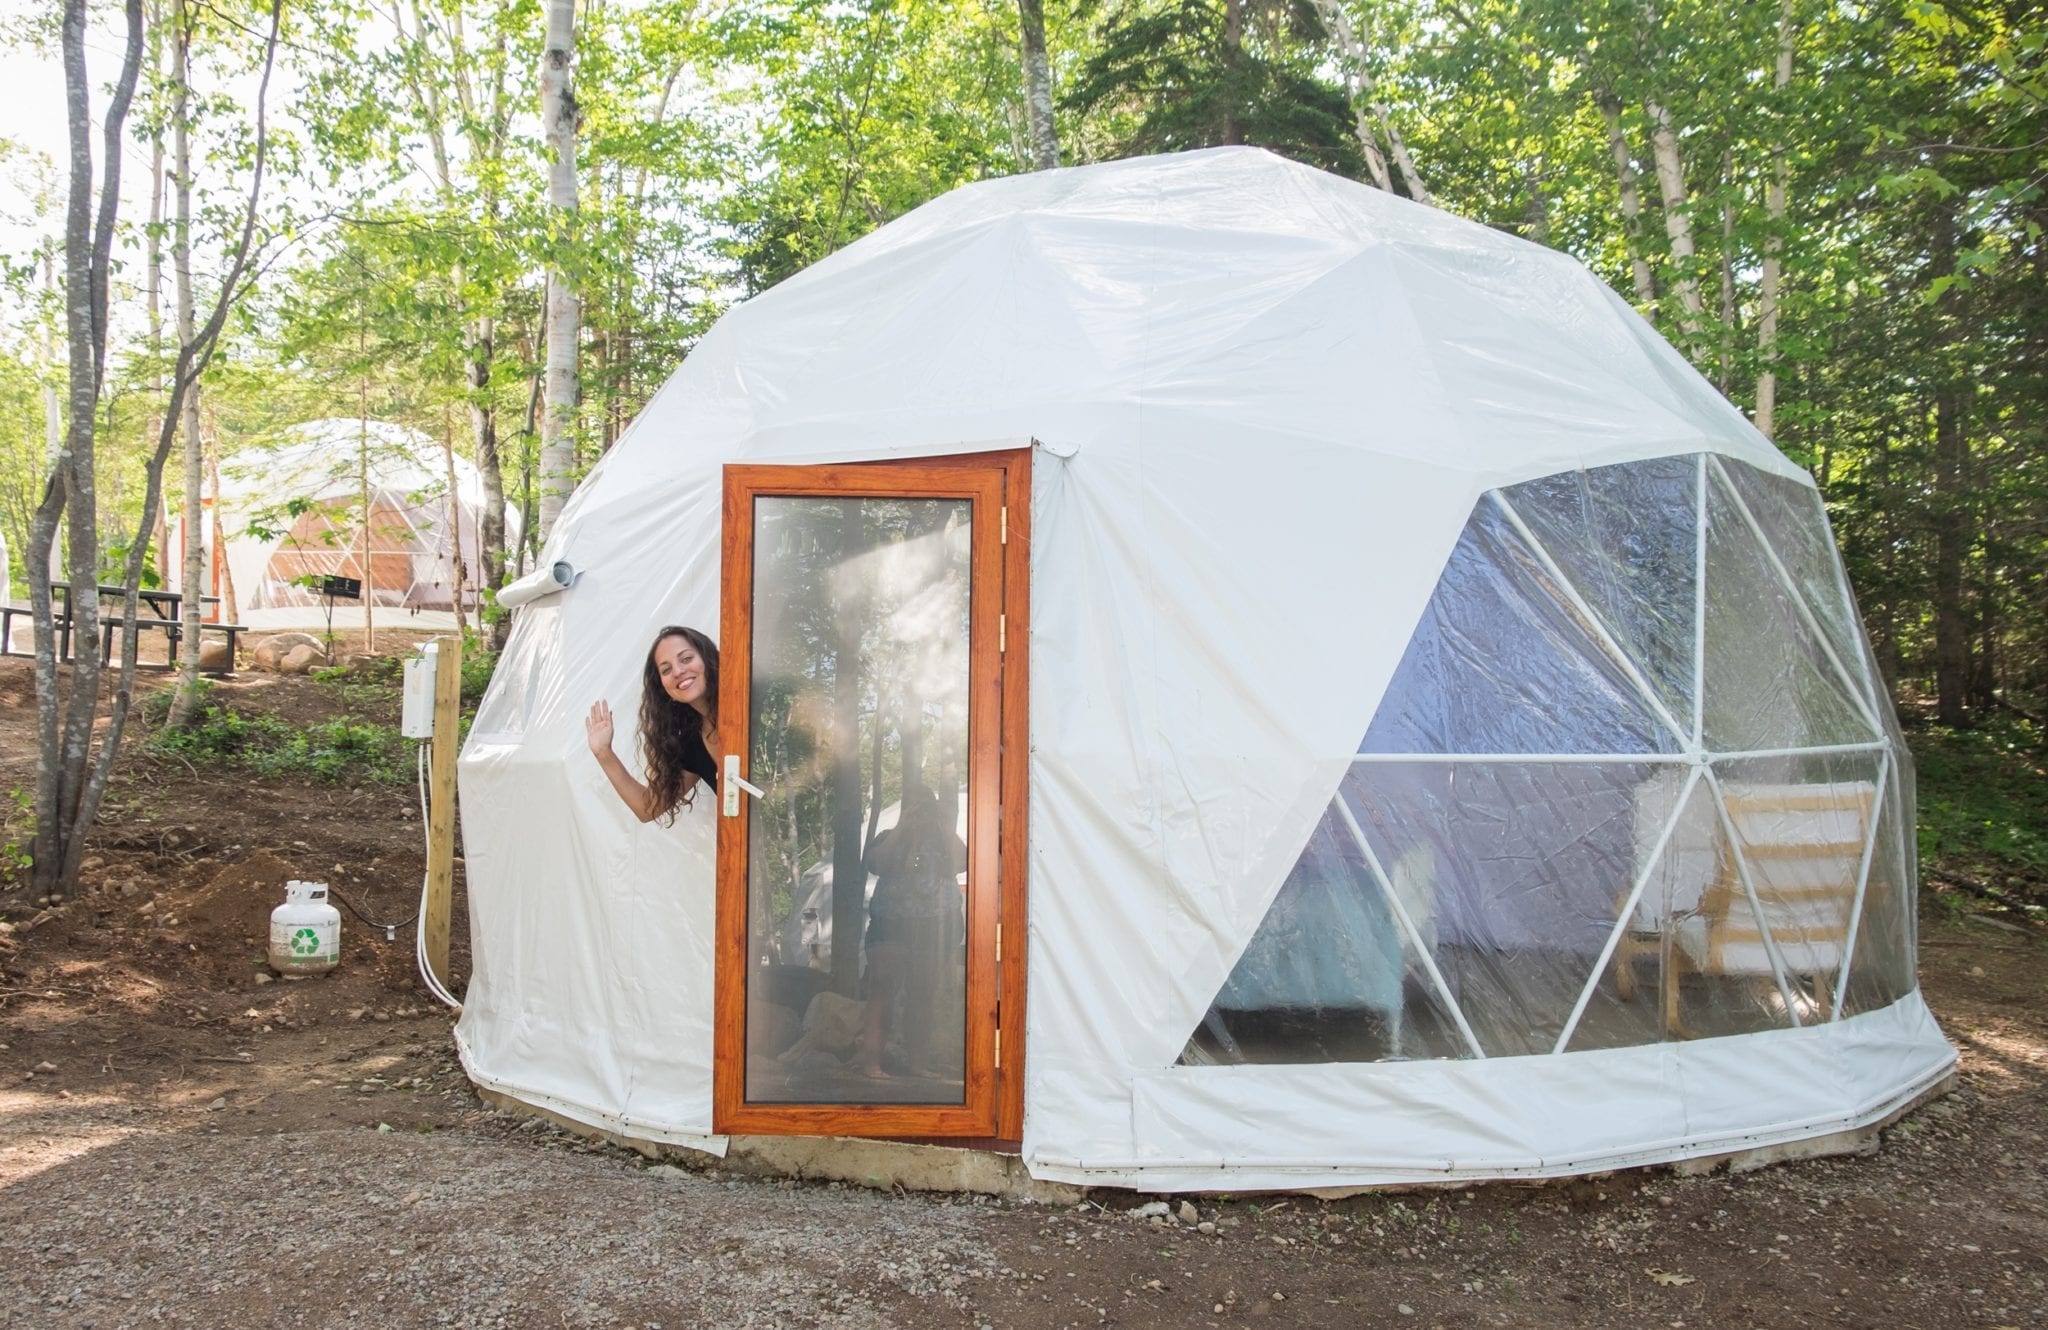 Kate poses hanging out the door in a Blue Bayou Geodesic Dome